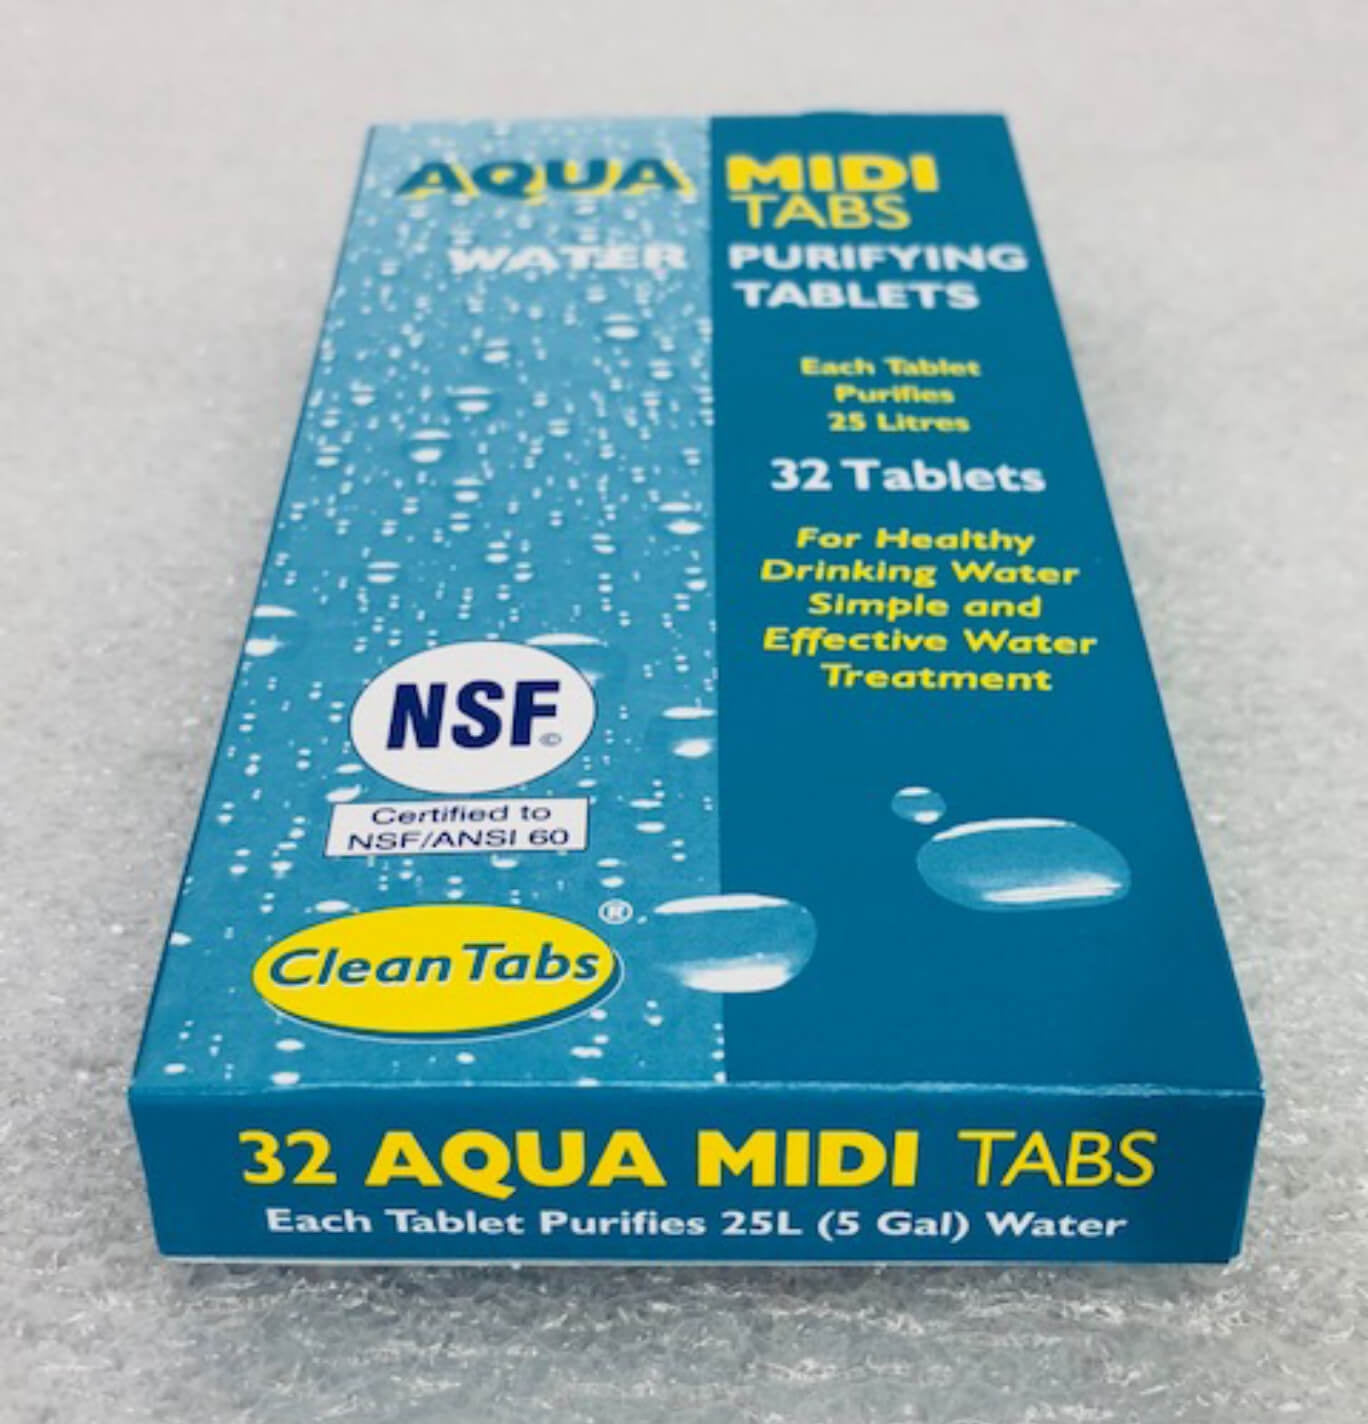 Clean Tabs Aqua Midi Water Purifying Tablets | 2 Packs of 32 Image